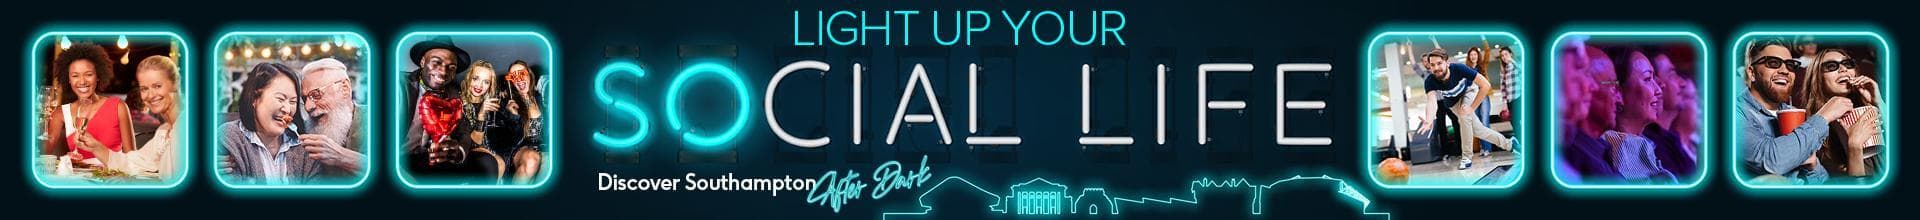 Light up your social life in Southampton banner